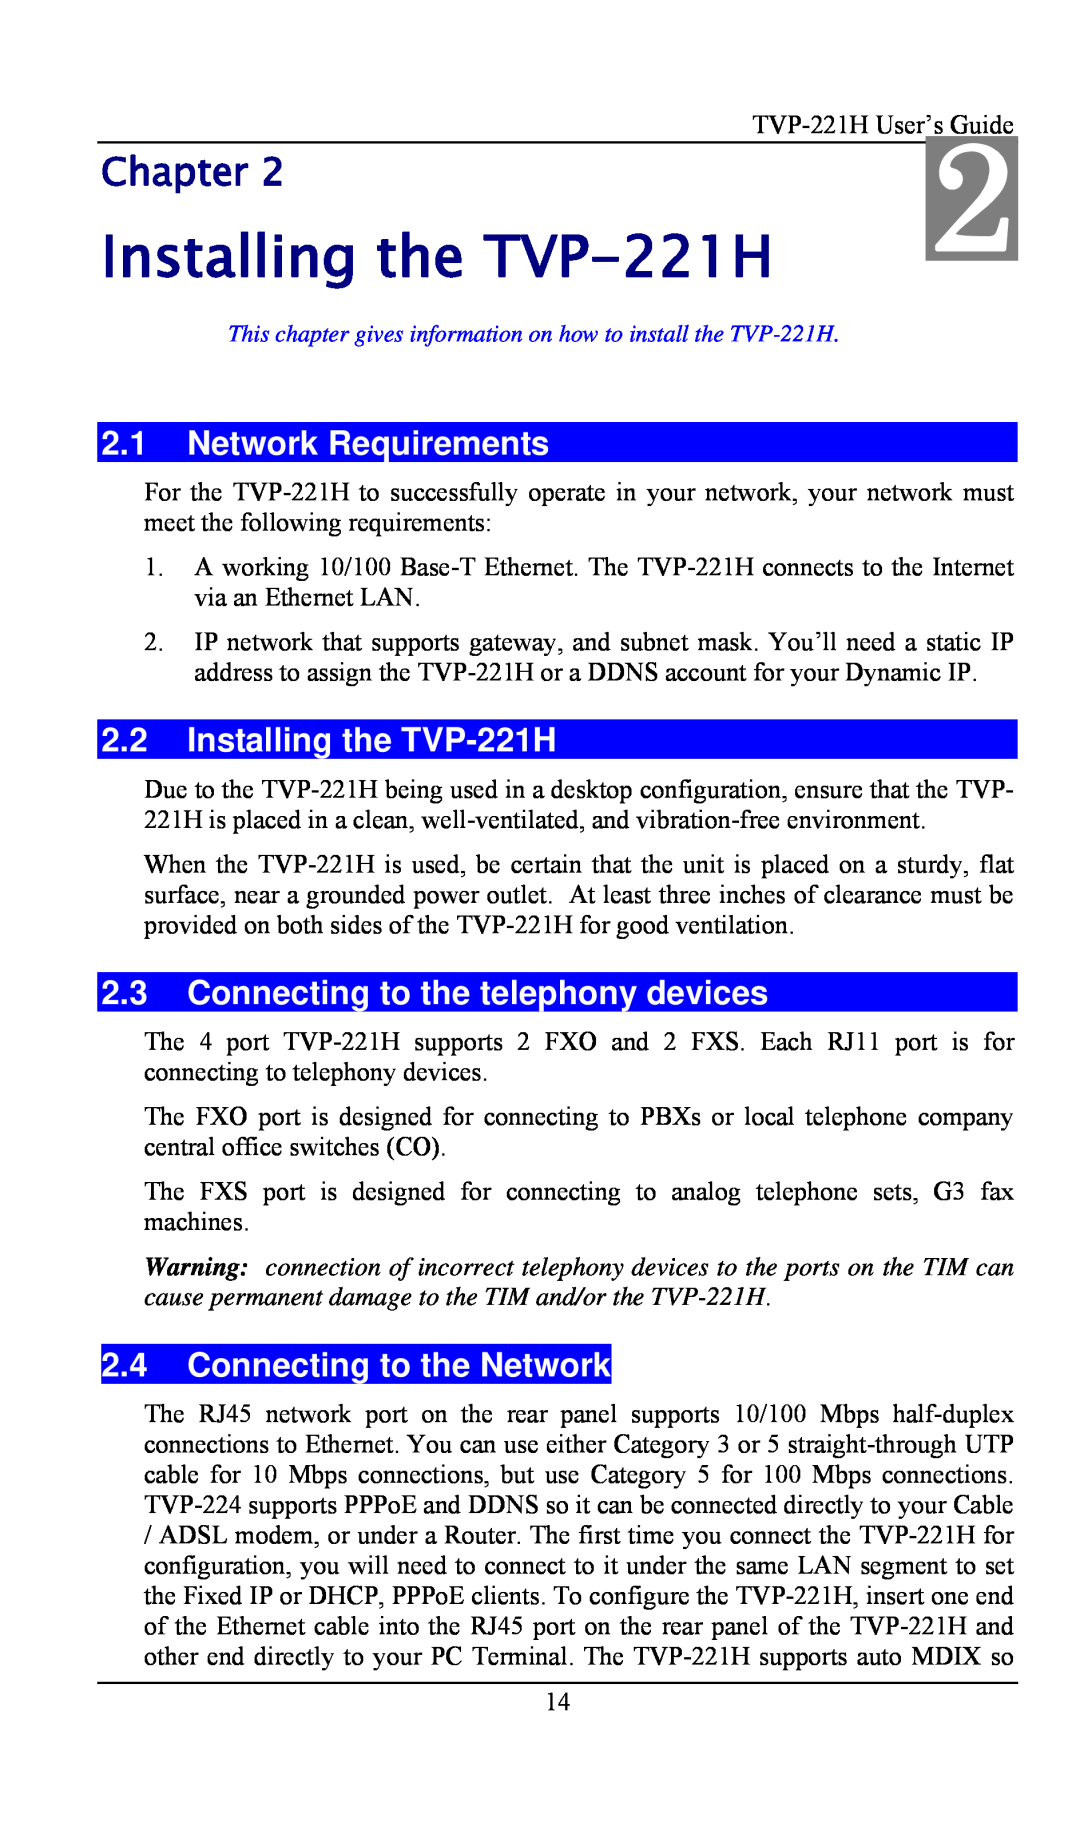 TRENDnet TVP- 221H manual Installing the TVP-221H, Network Requirements, Connecting to the telephony devices, Chapter 